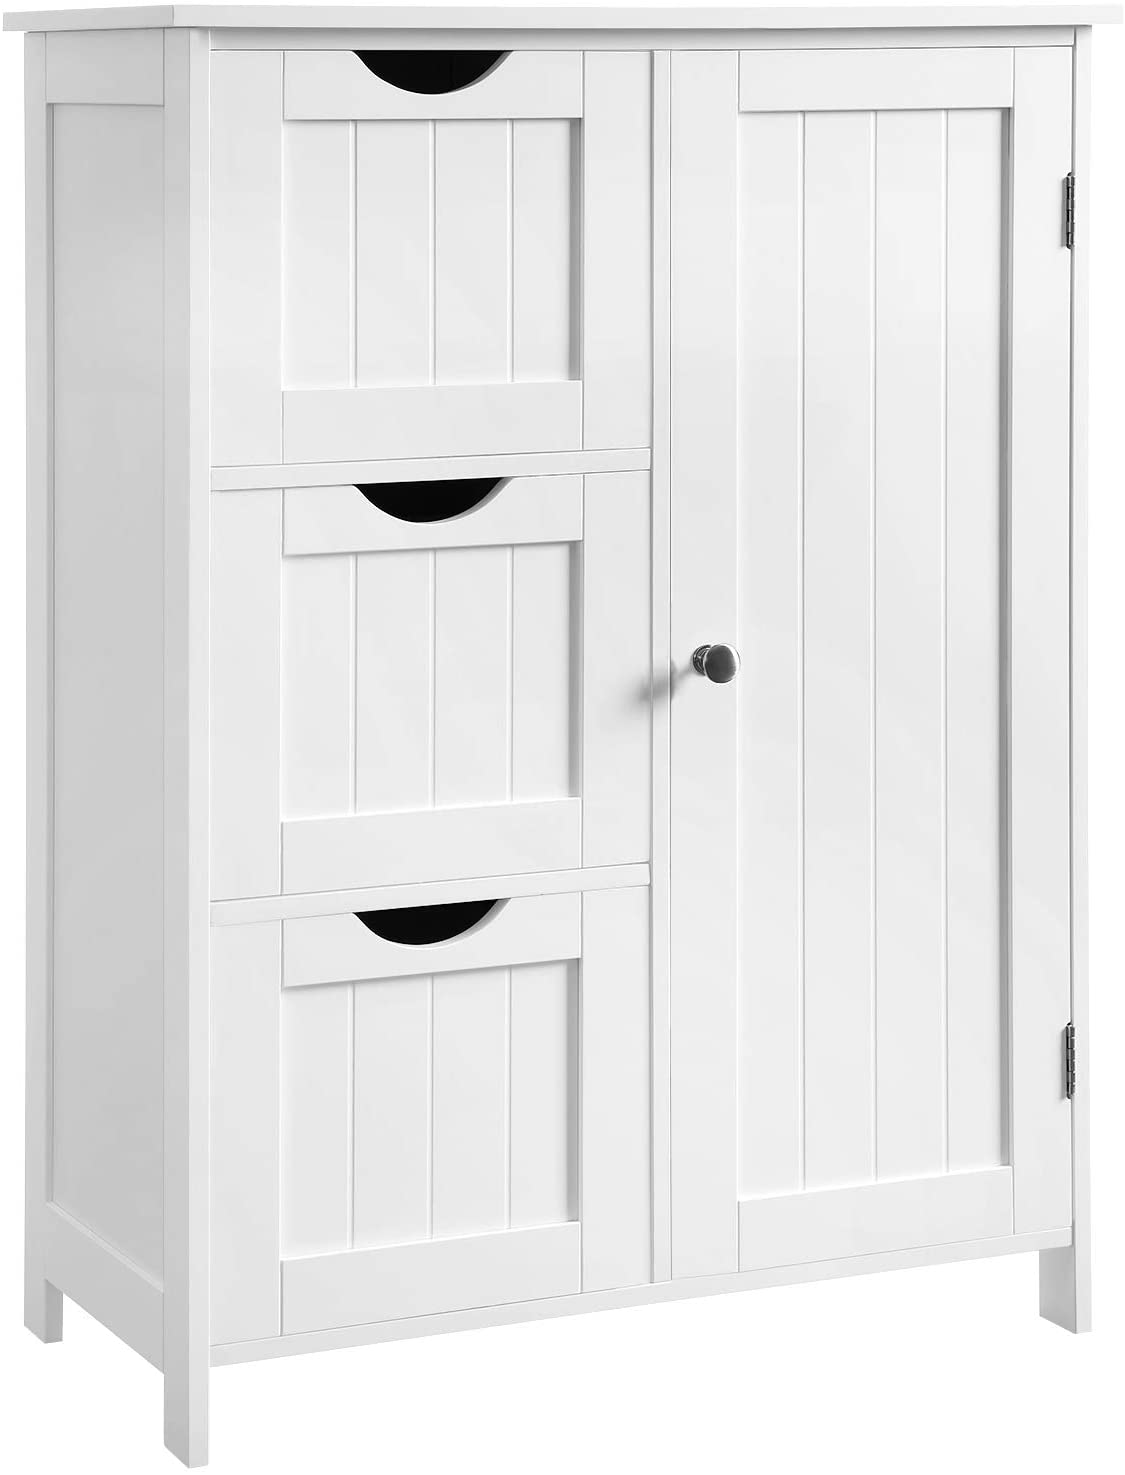 Bathroom Storage Cabinet, Floor Cabinet with 3 Large Drawers and 1 Adjustable Shelf, 60 x 30 x 81 cm, White BBC49WT RAW58.dk 